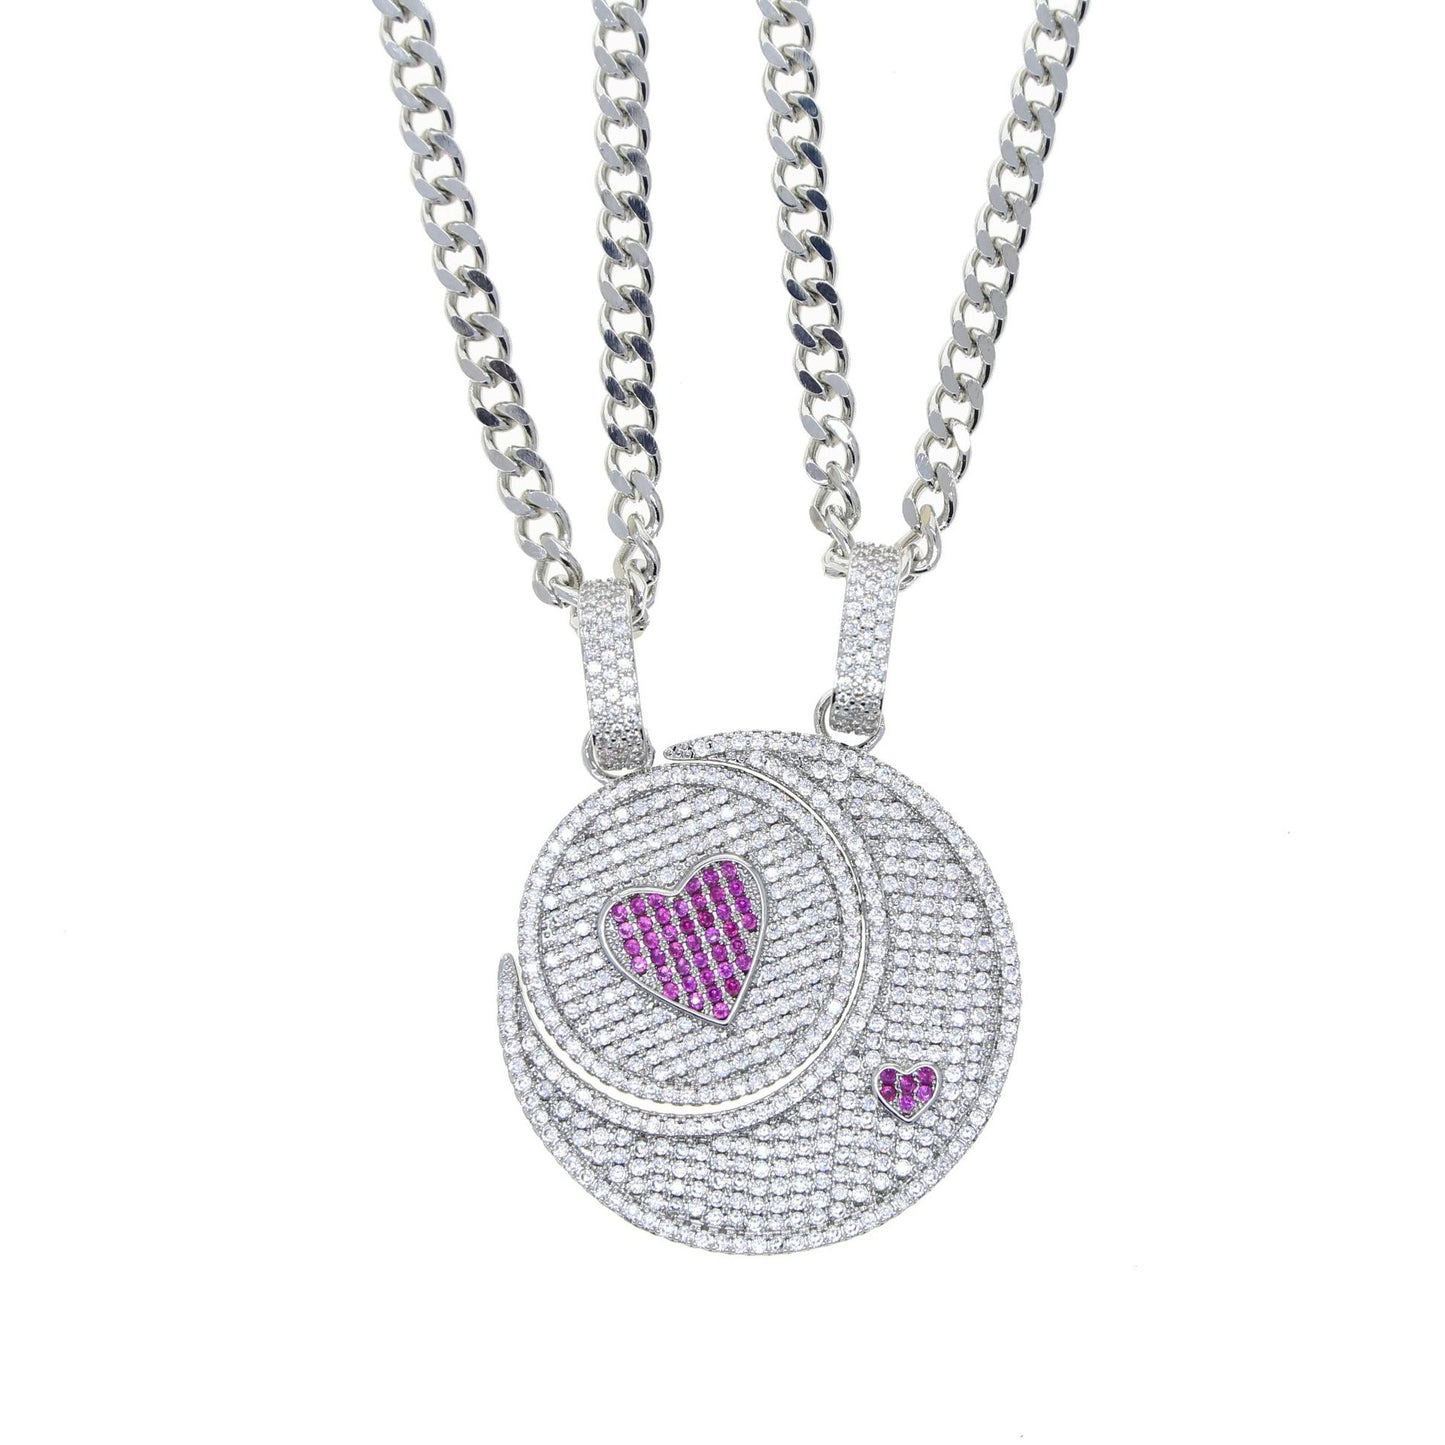 Sun and Moon Bff Necklaces Set for Best Friends